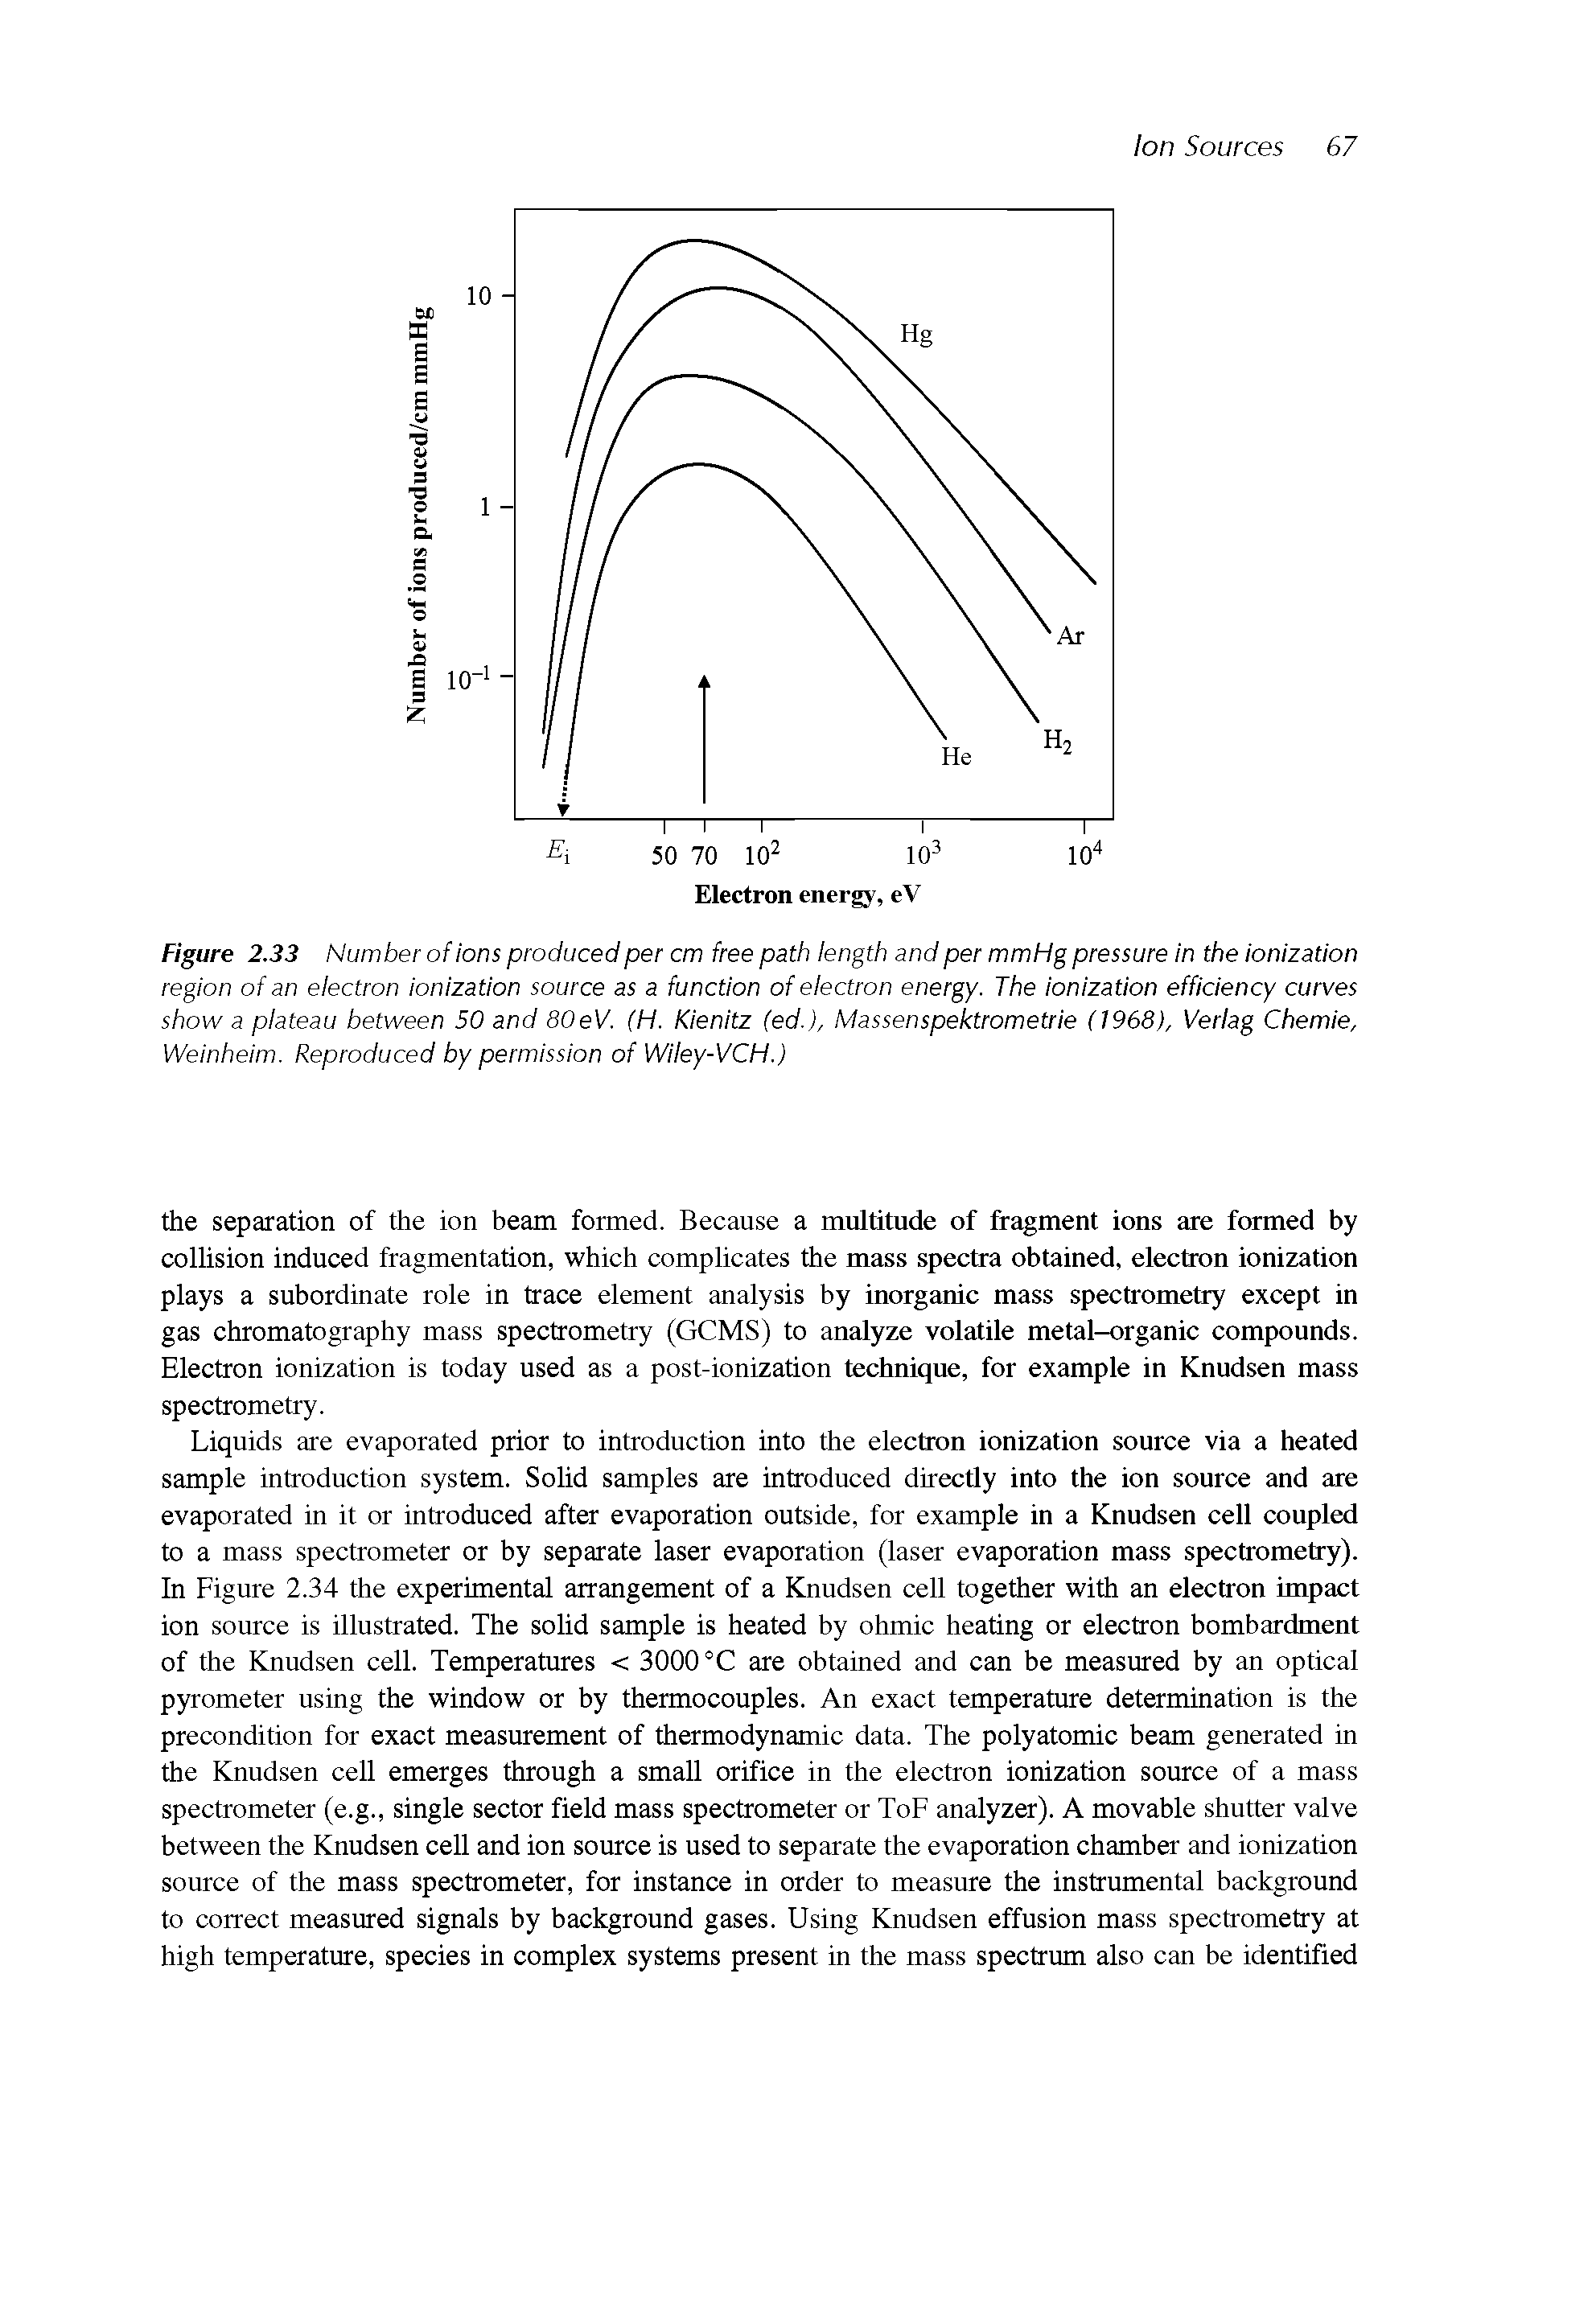 Figure 2.33 Number of ions produced per cm free path length and per mmHg pressure in the ionization region of an electron ionization source as a function of electron energy. The ionization efficiency curves show a plateau between 50 and 80eV. (H. Kienitz (ed.), Massenspektrometrie (1968), Verlag Chemie, Weinheim. Reproduced by permission of Wiley-VCH.)...